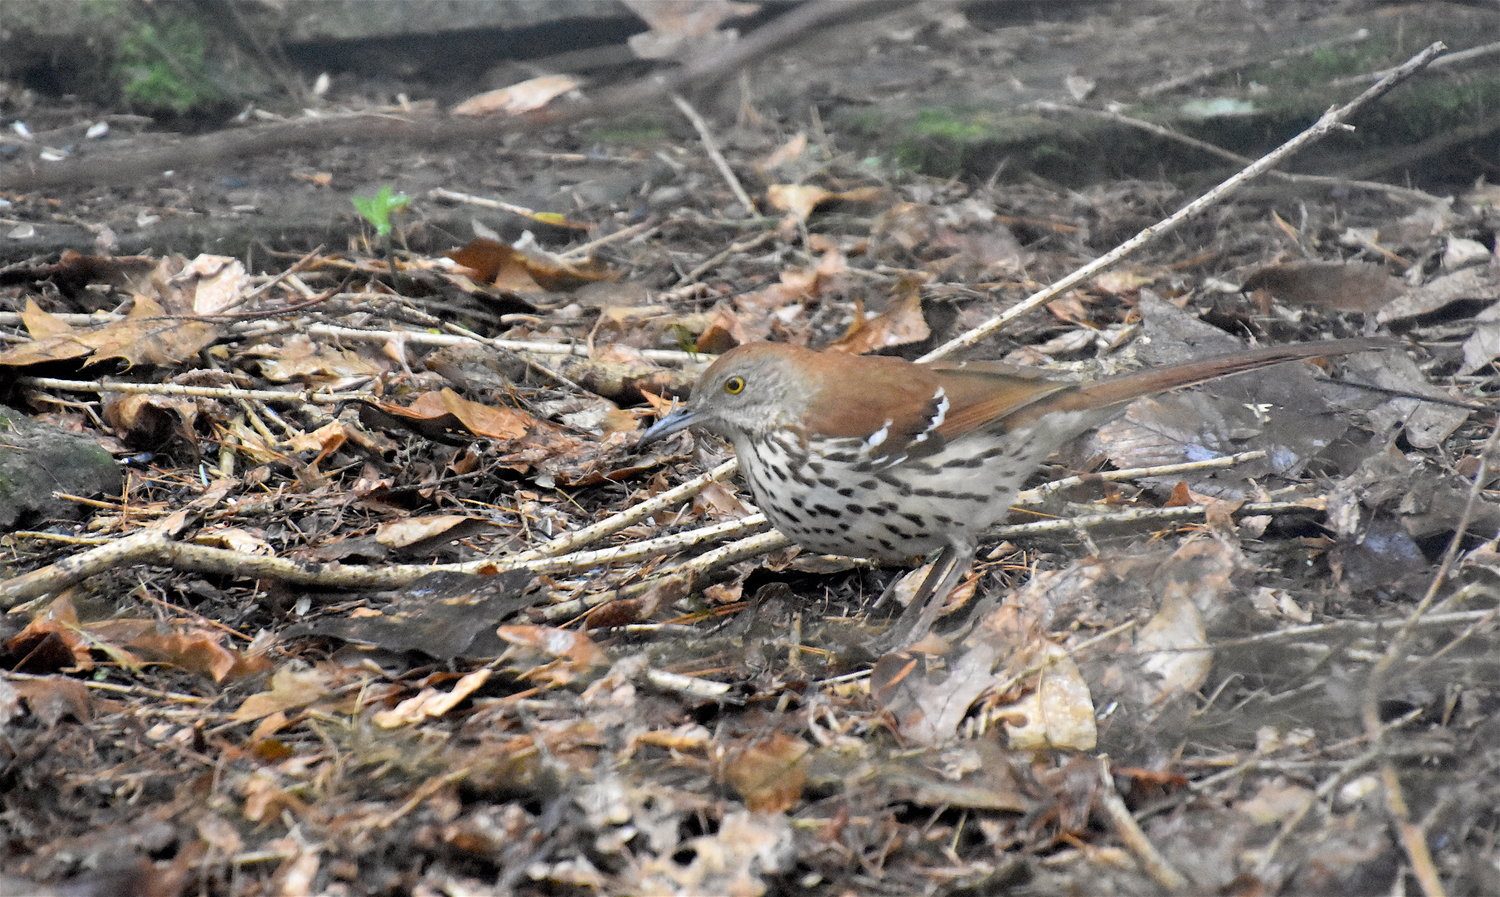 One of the most recognizable features of the brown thrasher is its distinctive yellow eye. This large reddish-brown songbird sports a long slightly down-curved bill and dark streaking on its light-colored underparts.